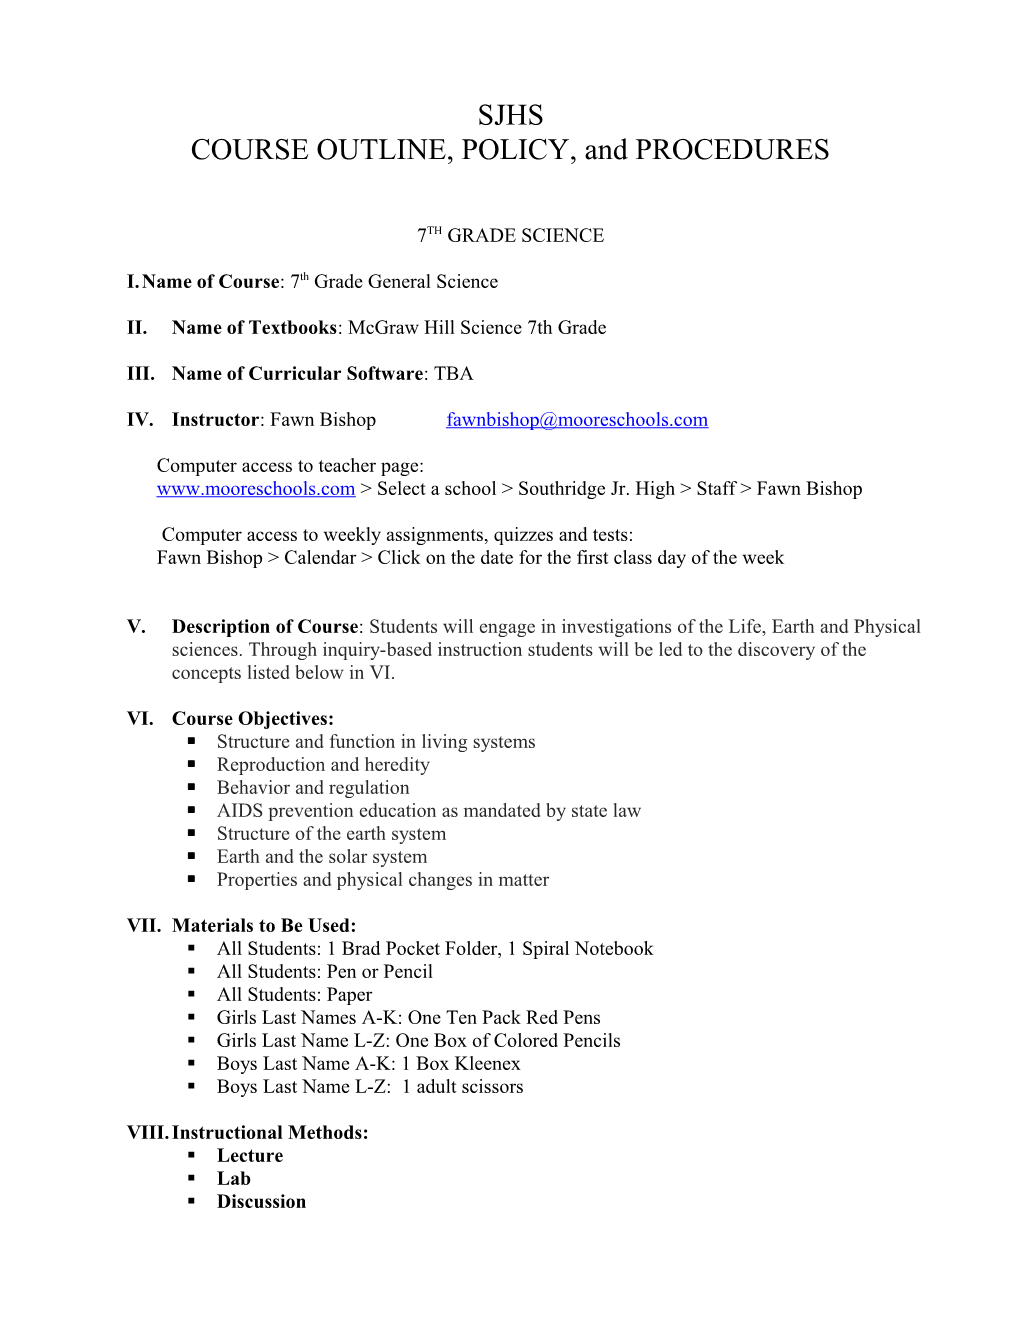 COURSE OUTLINE, POLICY, and PROCEDURES